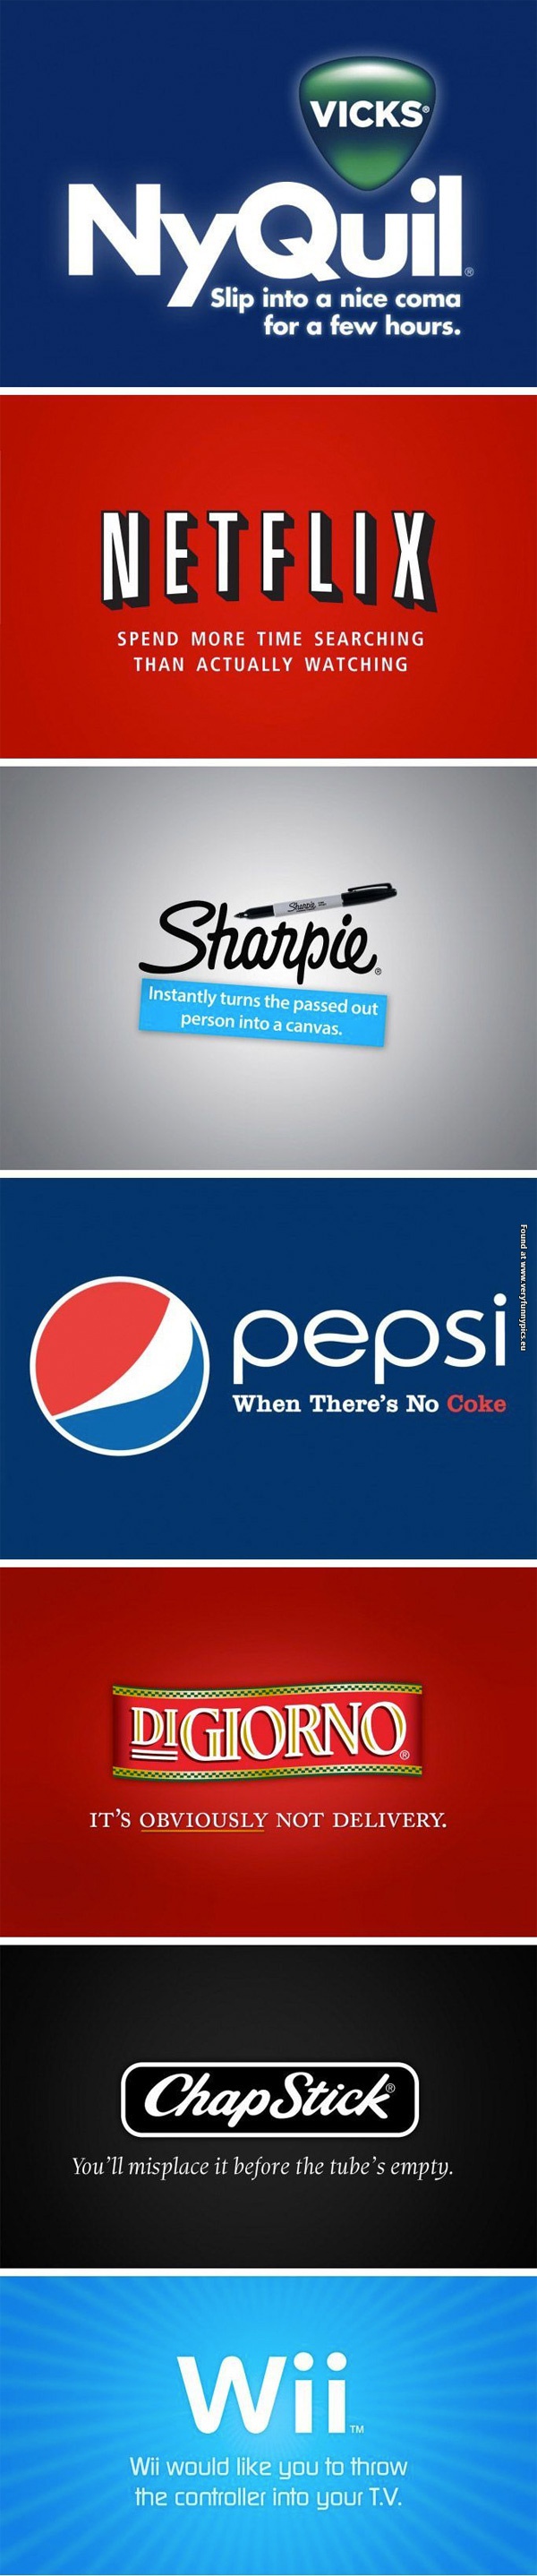 funny-pictures-what-the-logos-realy-means